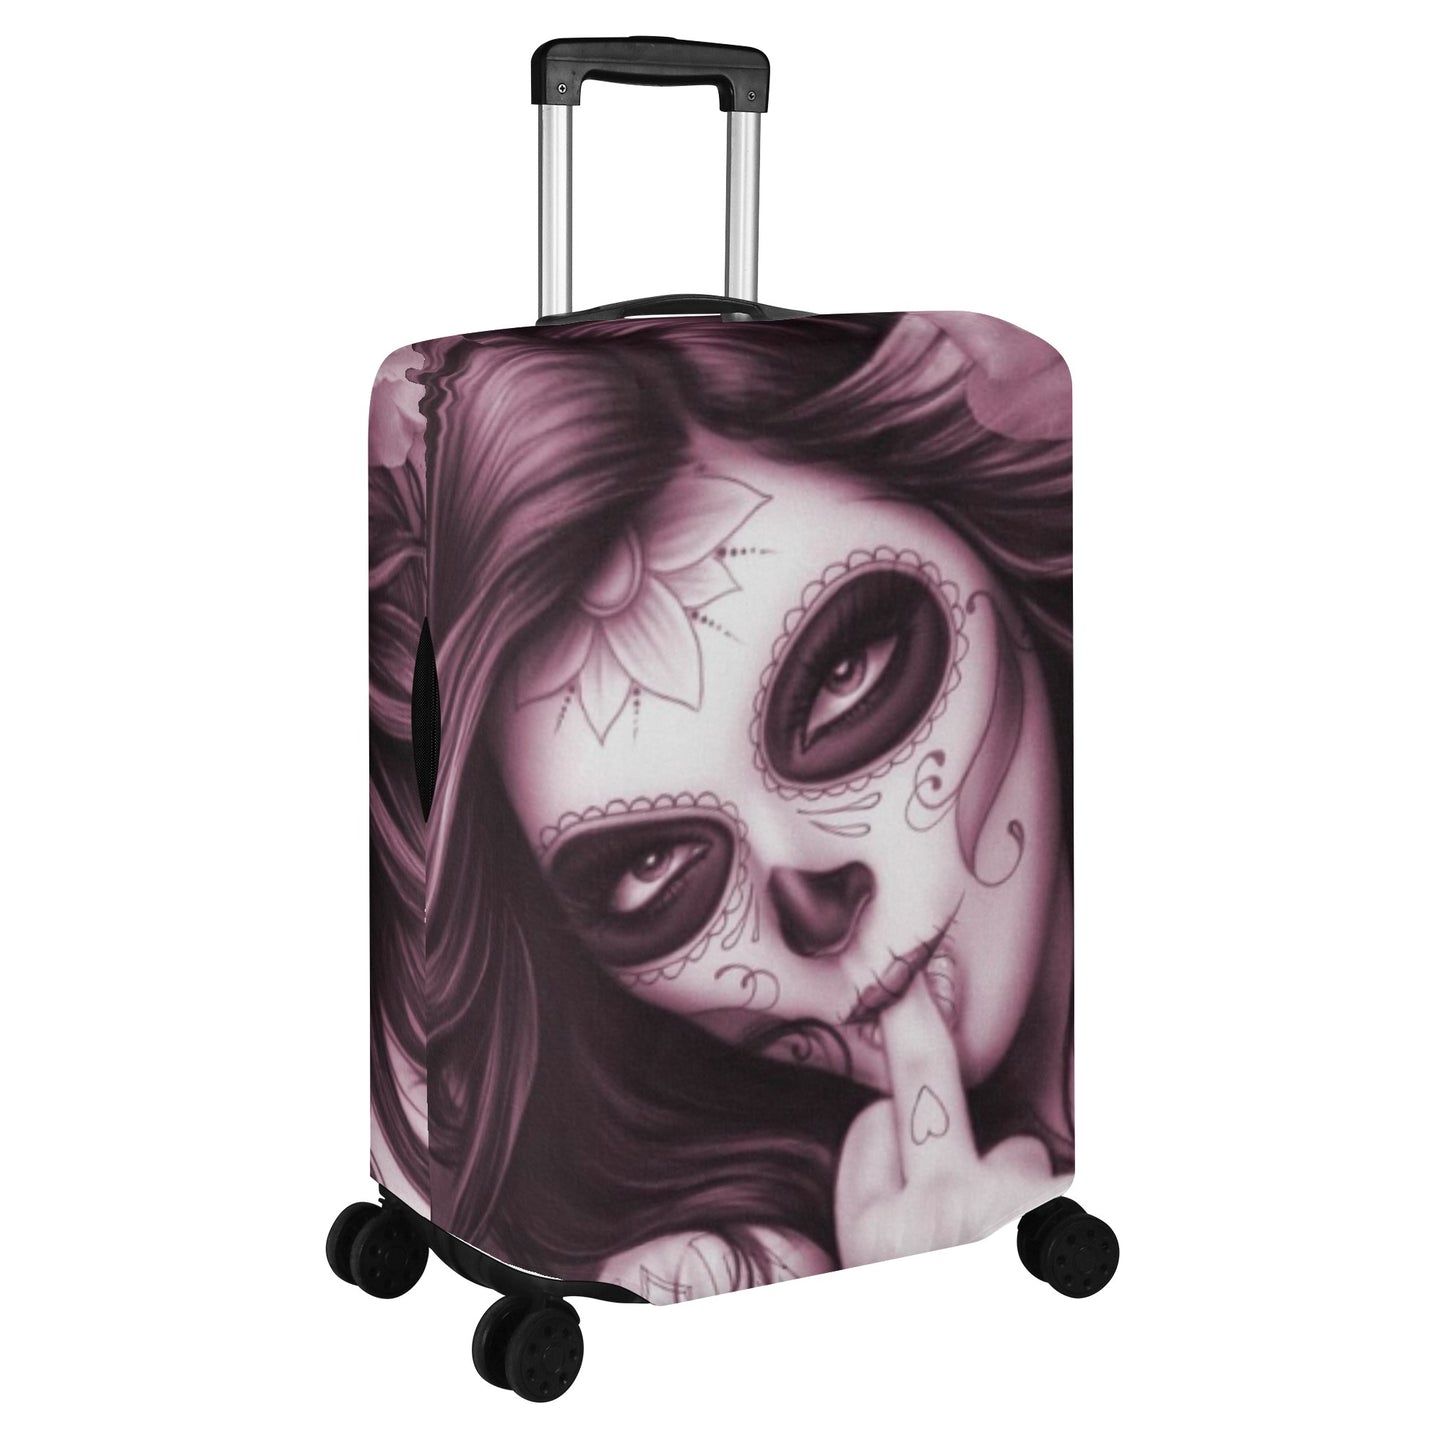 Sugar skull girl day of the dead luggage cover set